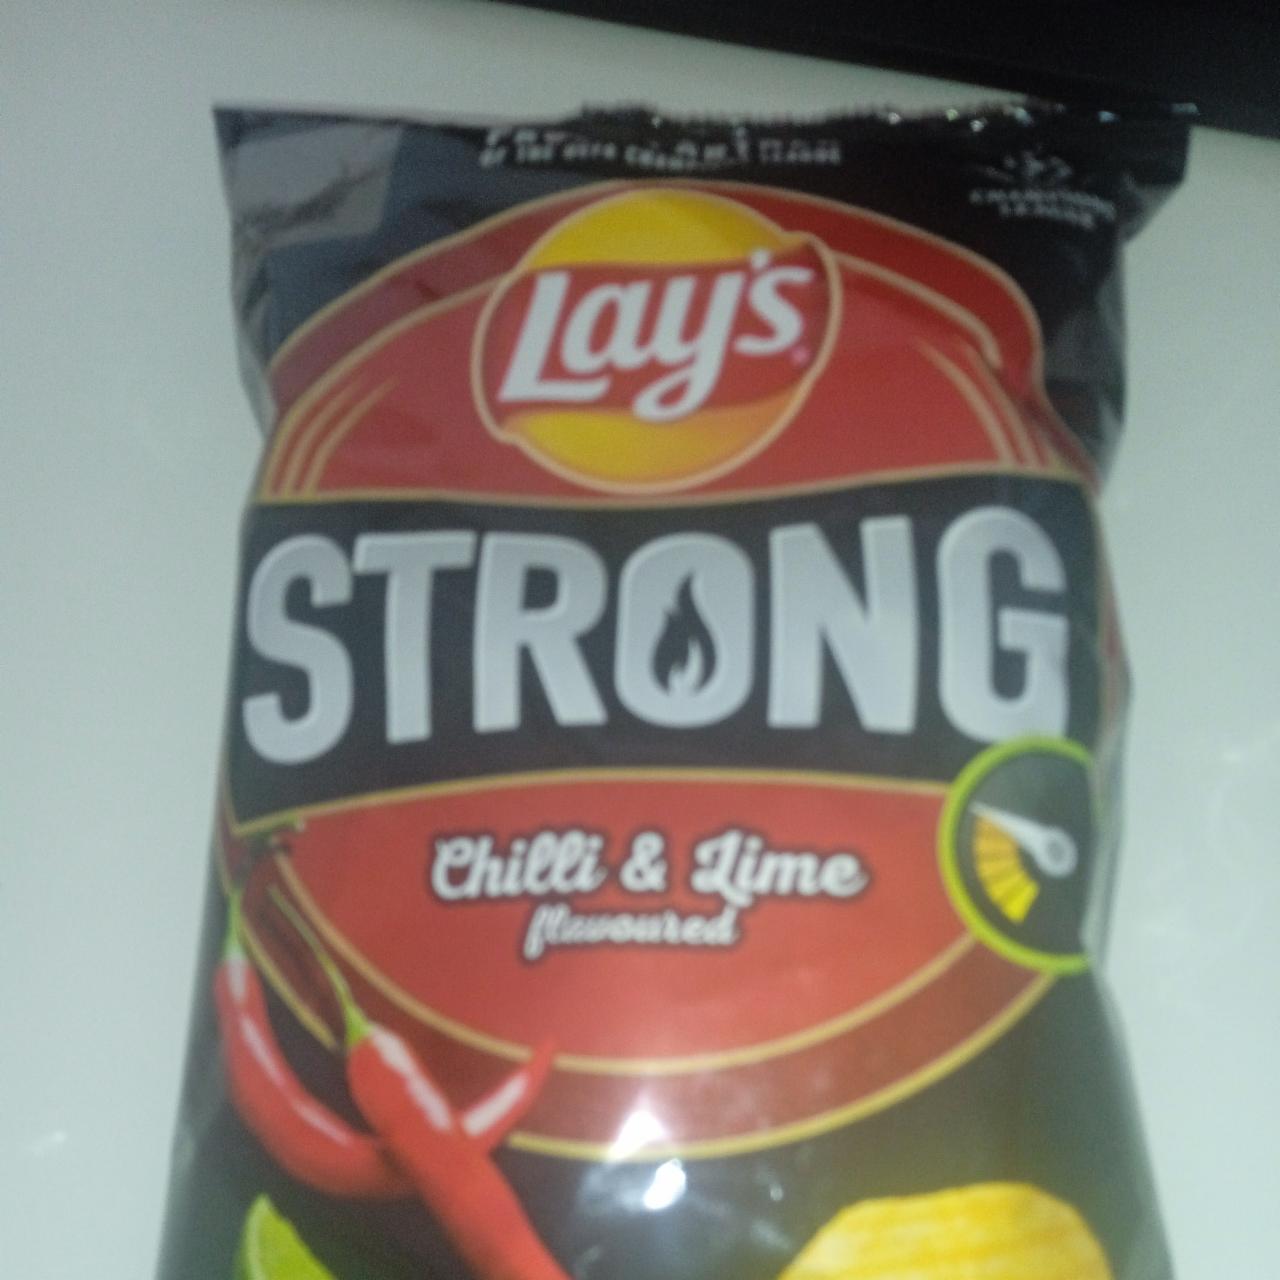 Fotografie - Strong Chilli & Lime flavoured Lay's